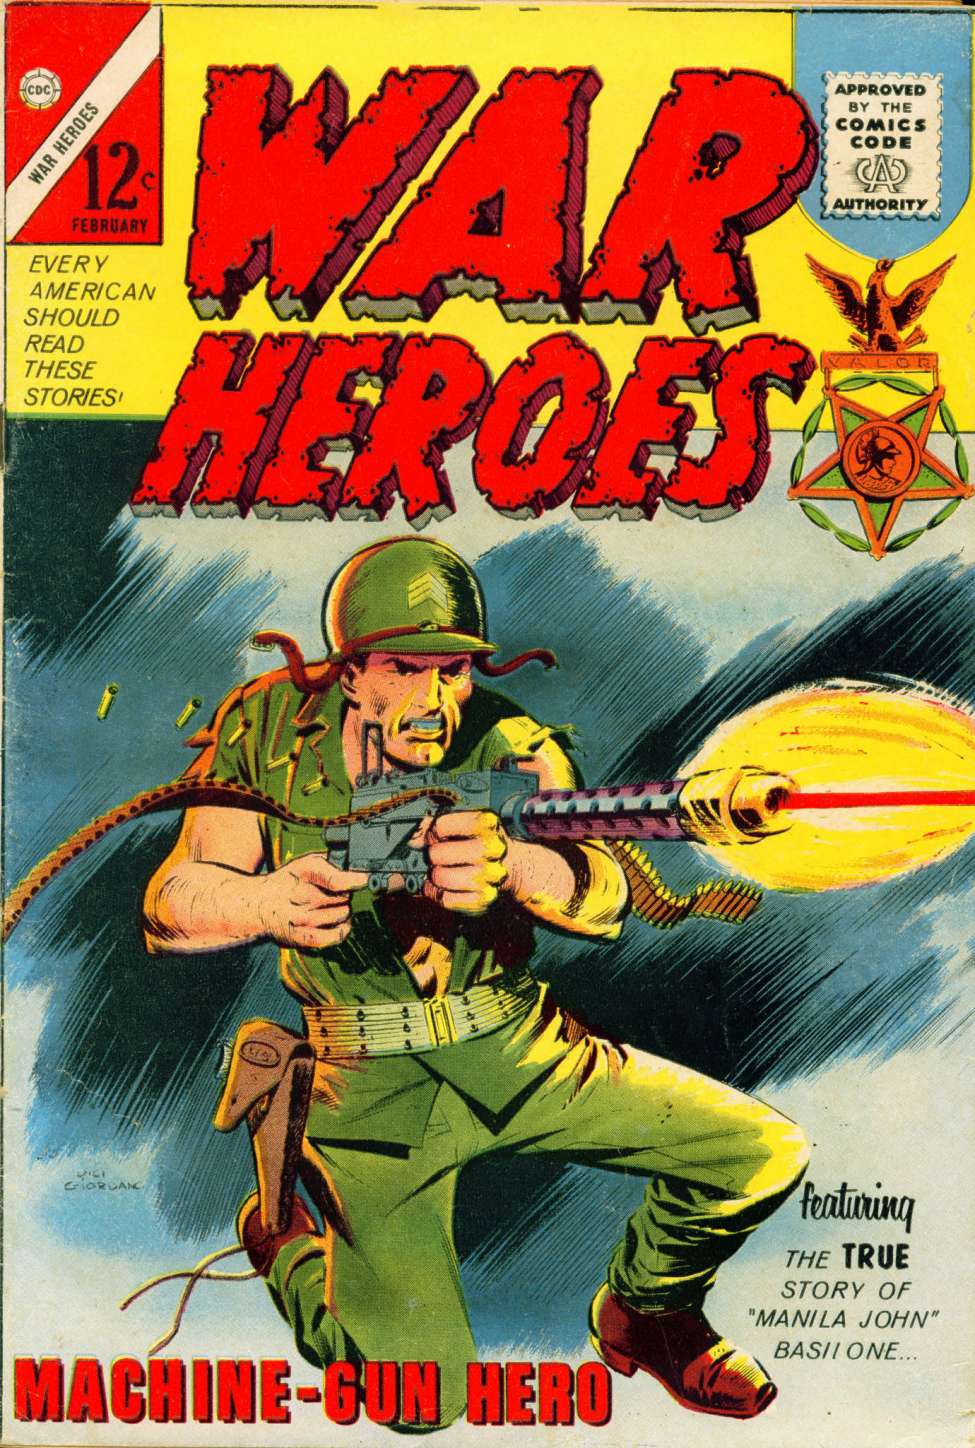 Book Cover For War Heroes 1